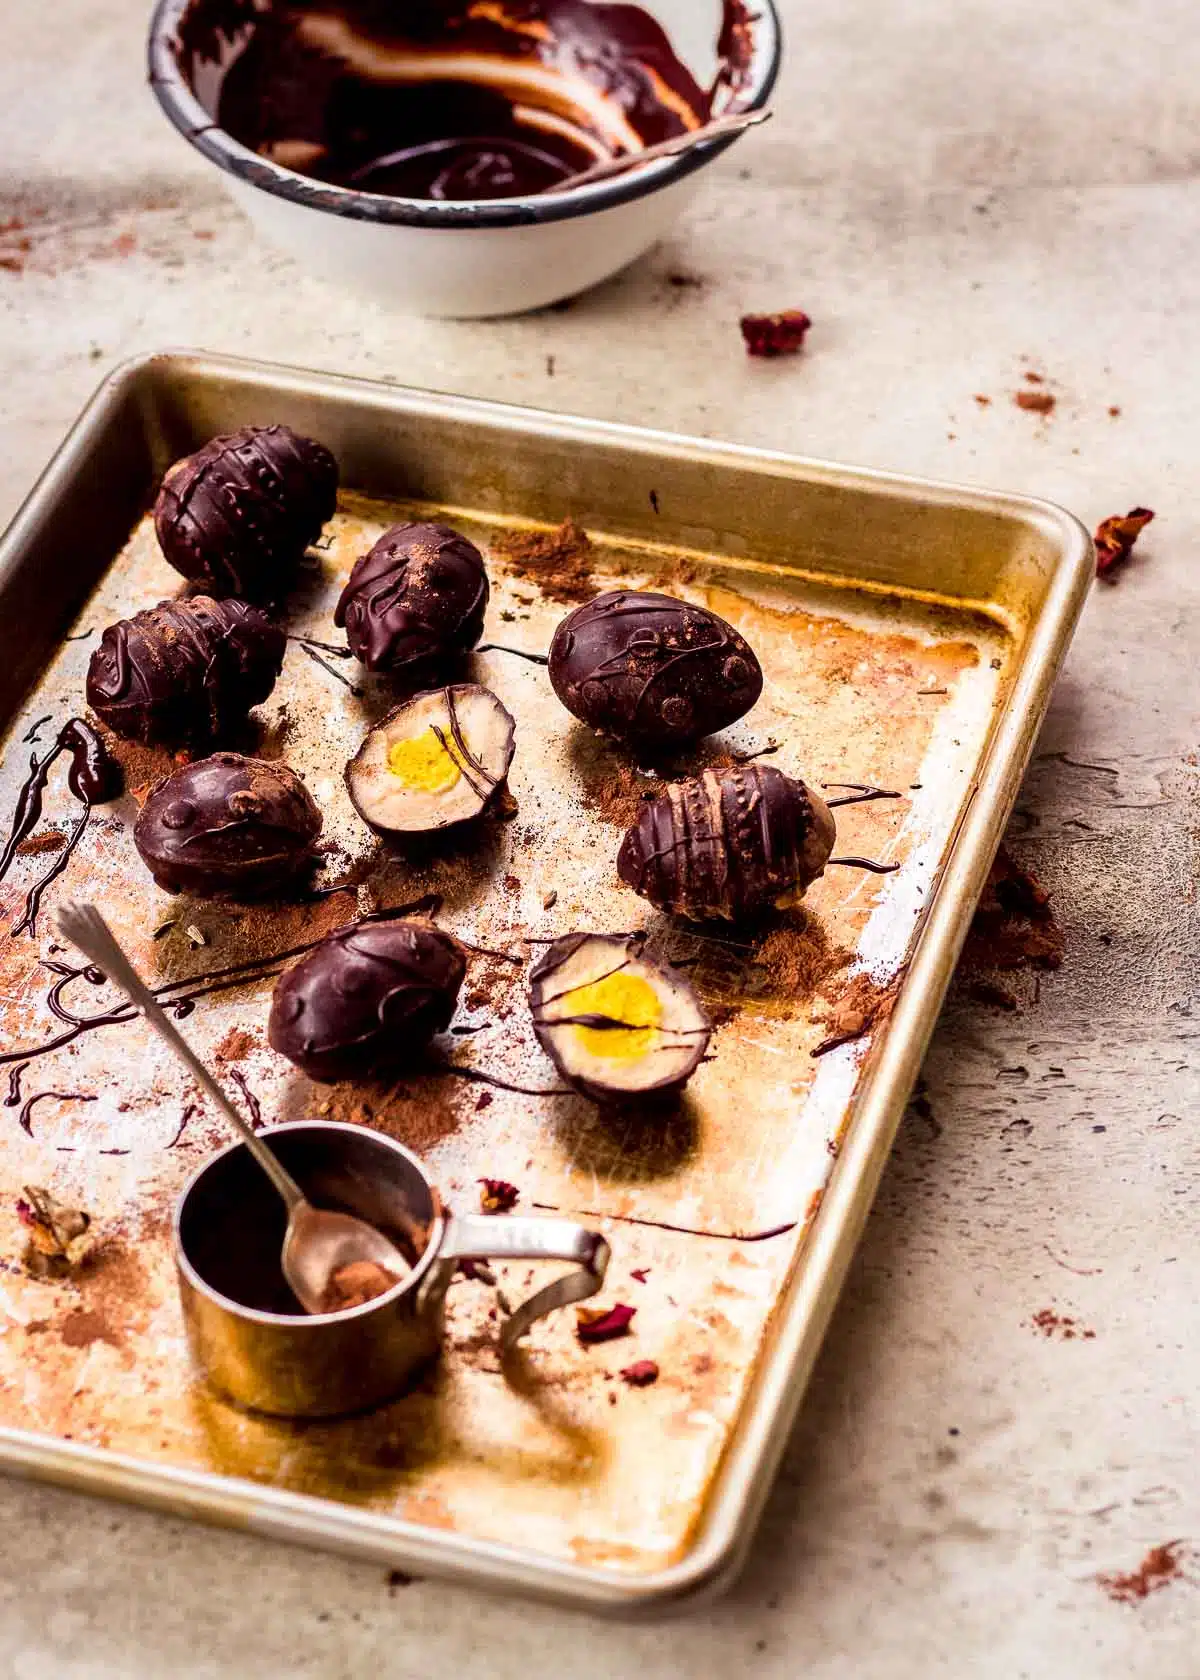 Vegan creme eggs on baking tray with bowl of melted chocolate.